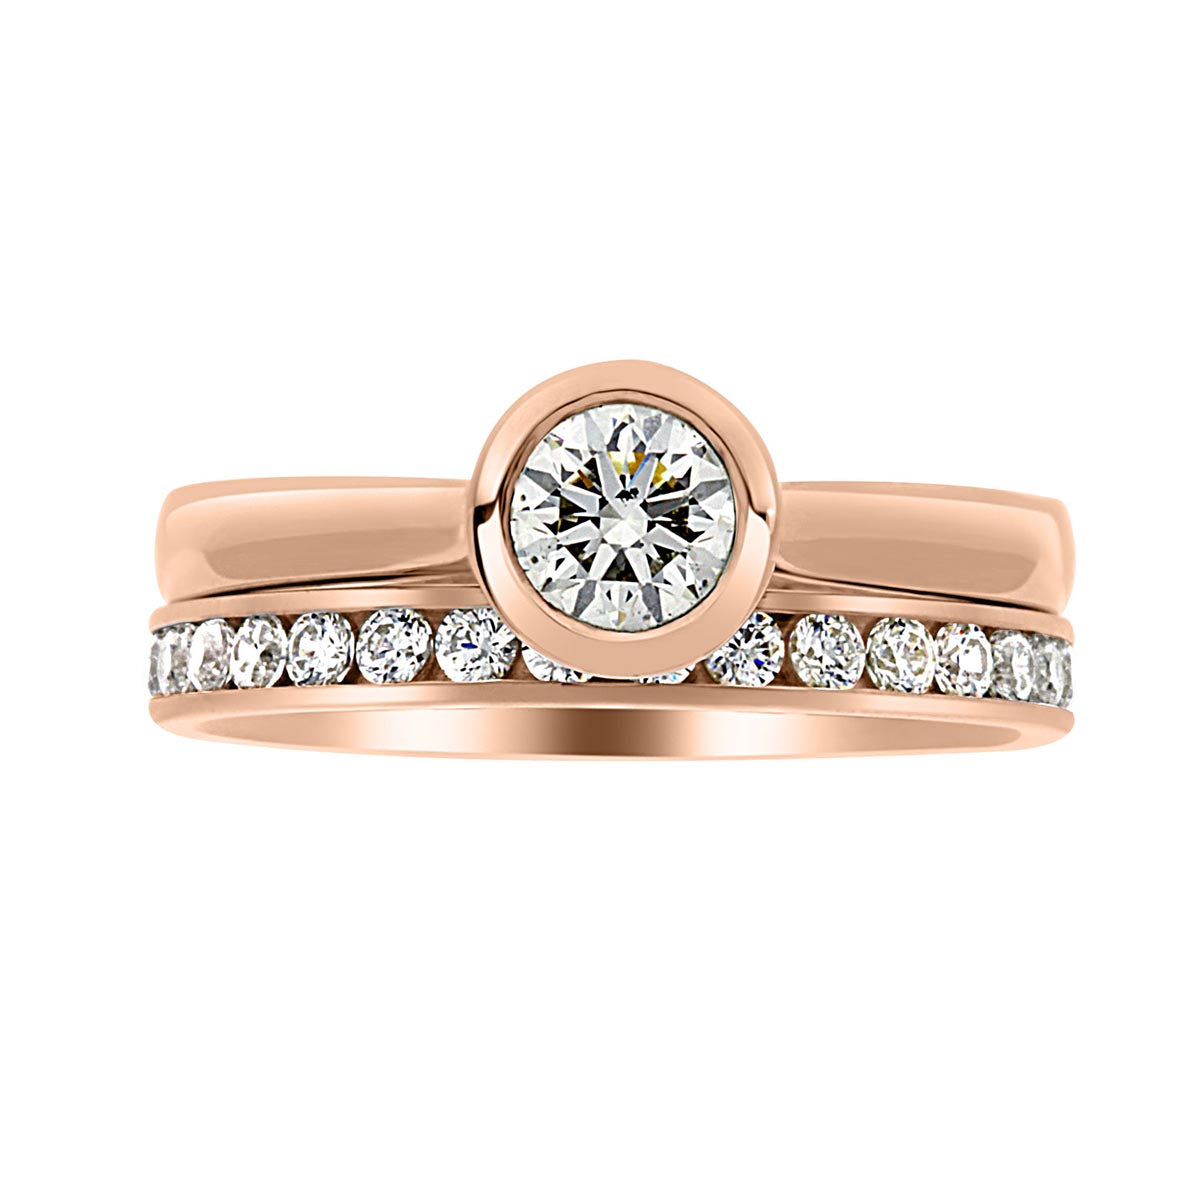 Bezel Set Engagement ring in 18kt yellow gold  with a diamond wedding ring